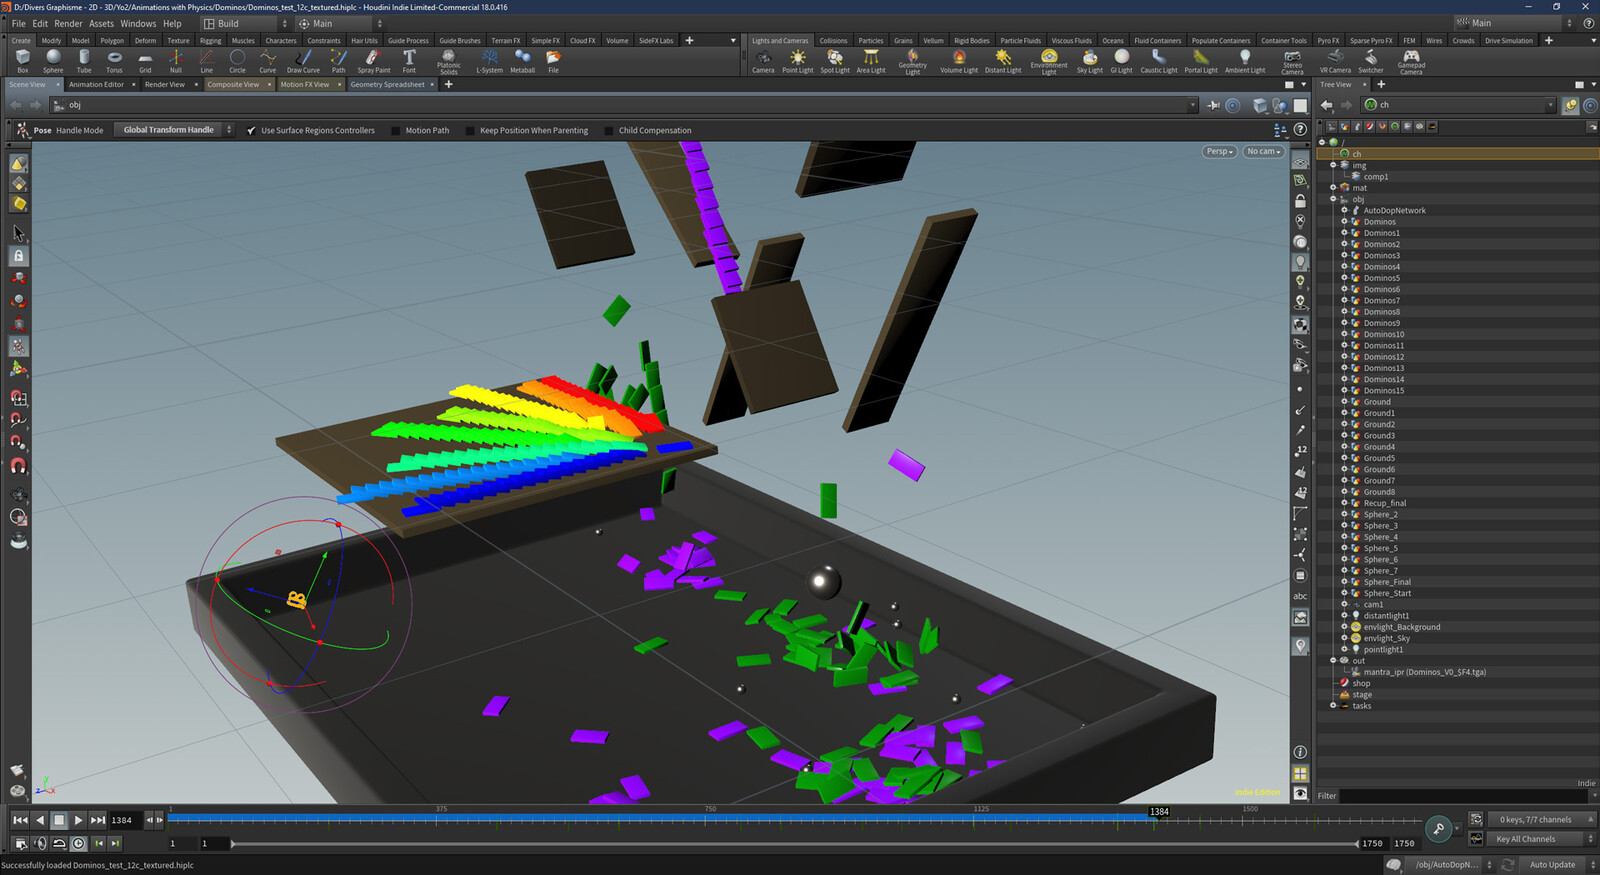 Simulation calculation in progress... Only few minutes, Houdini dynamic engine is really powerful! ;-)